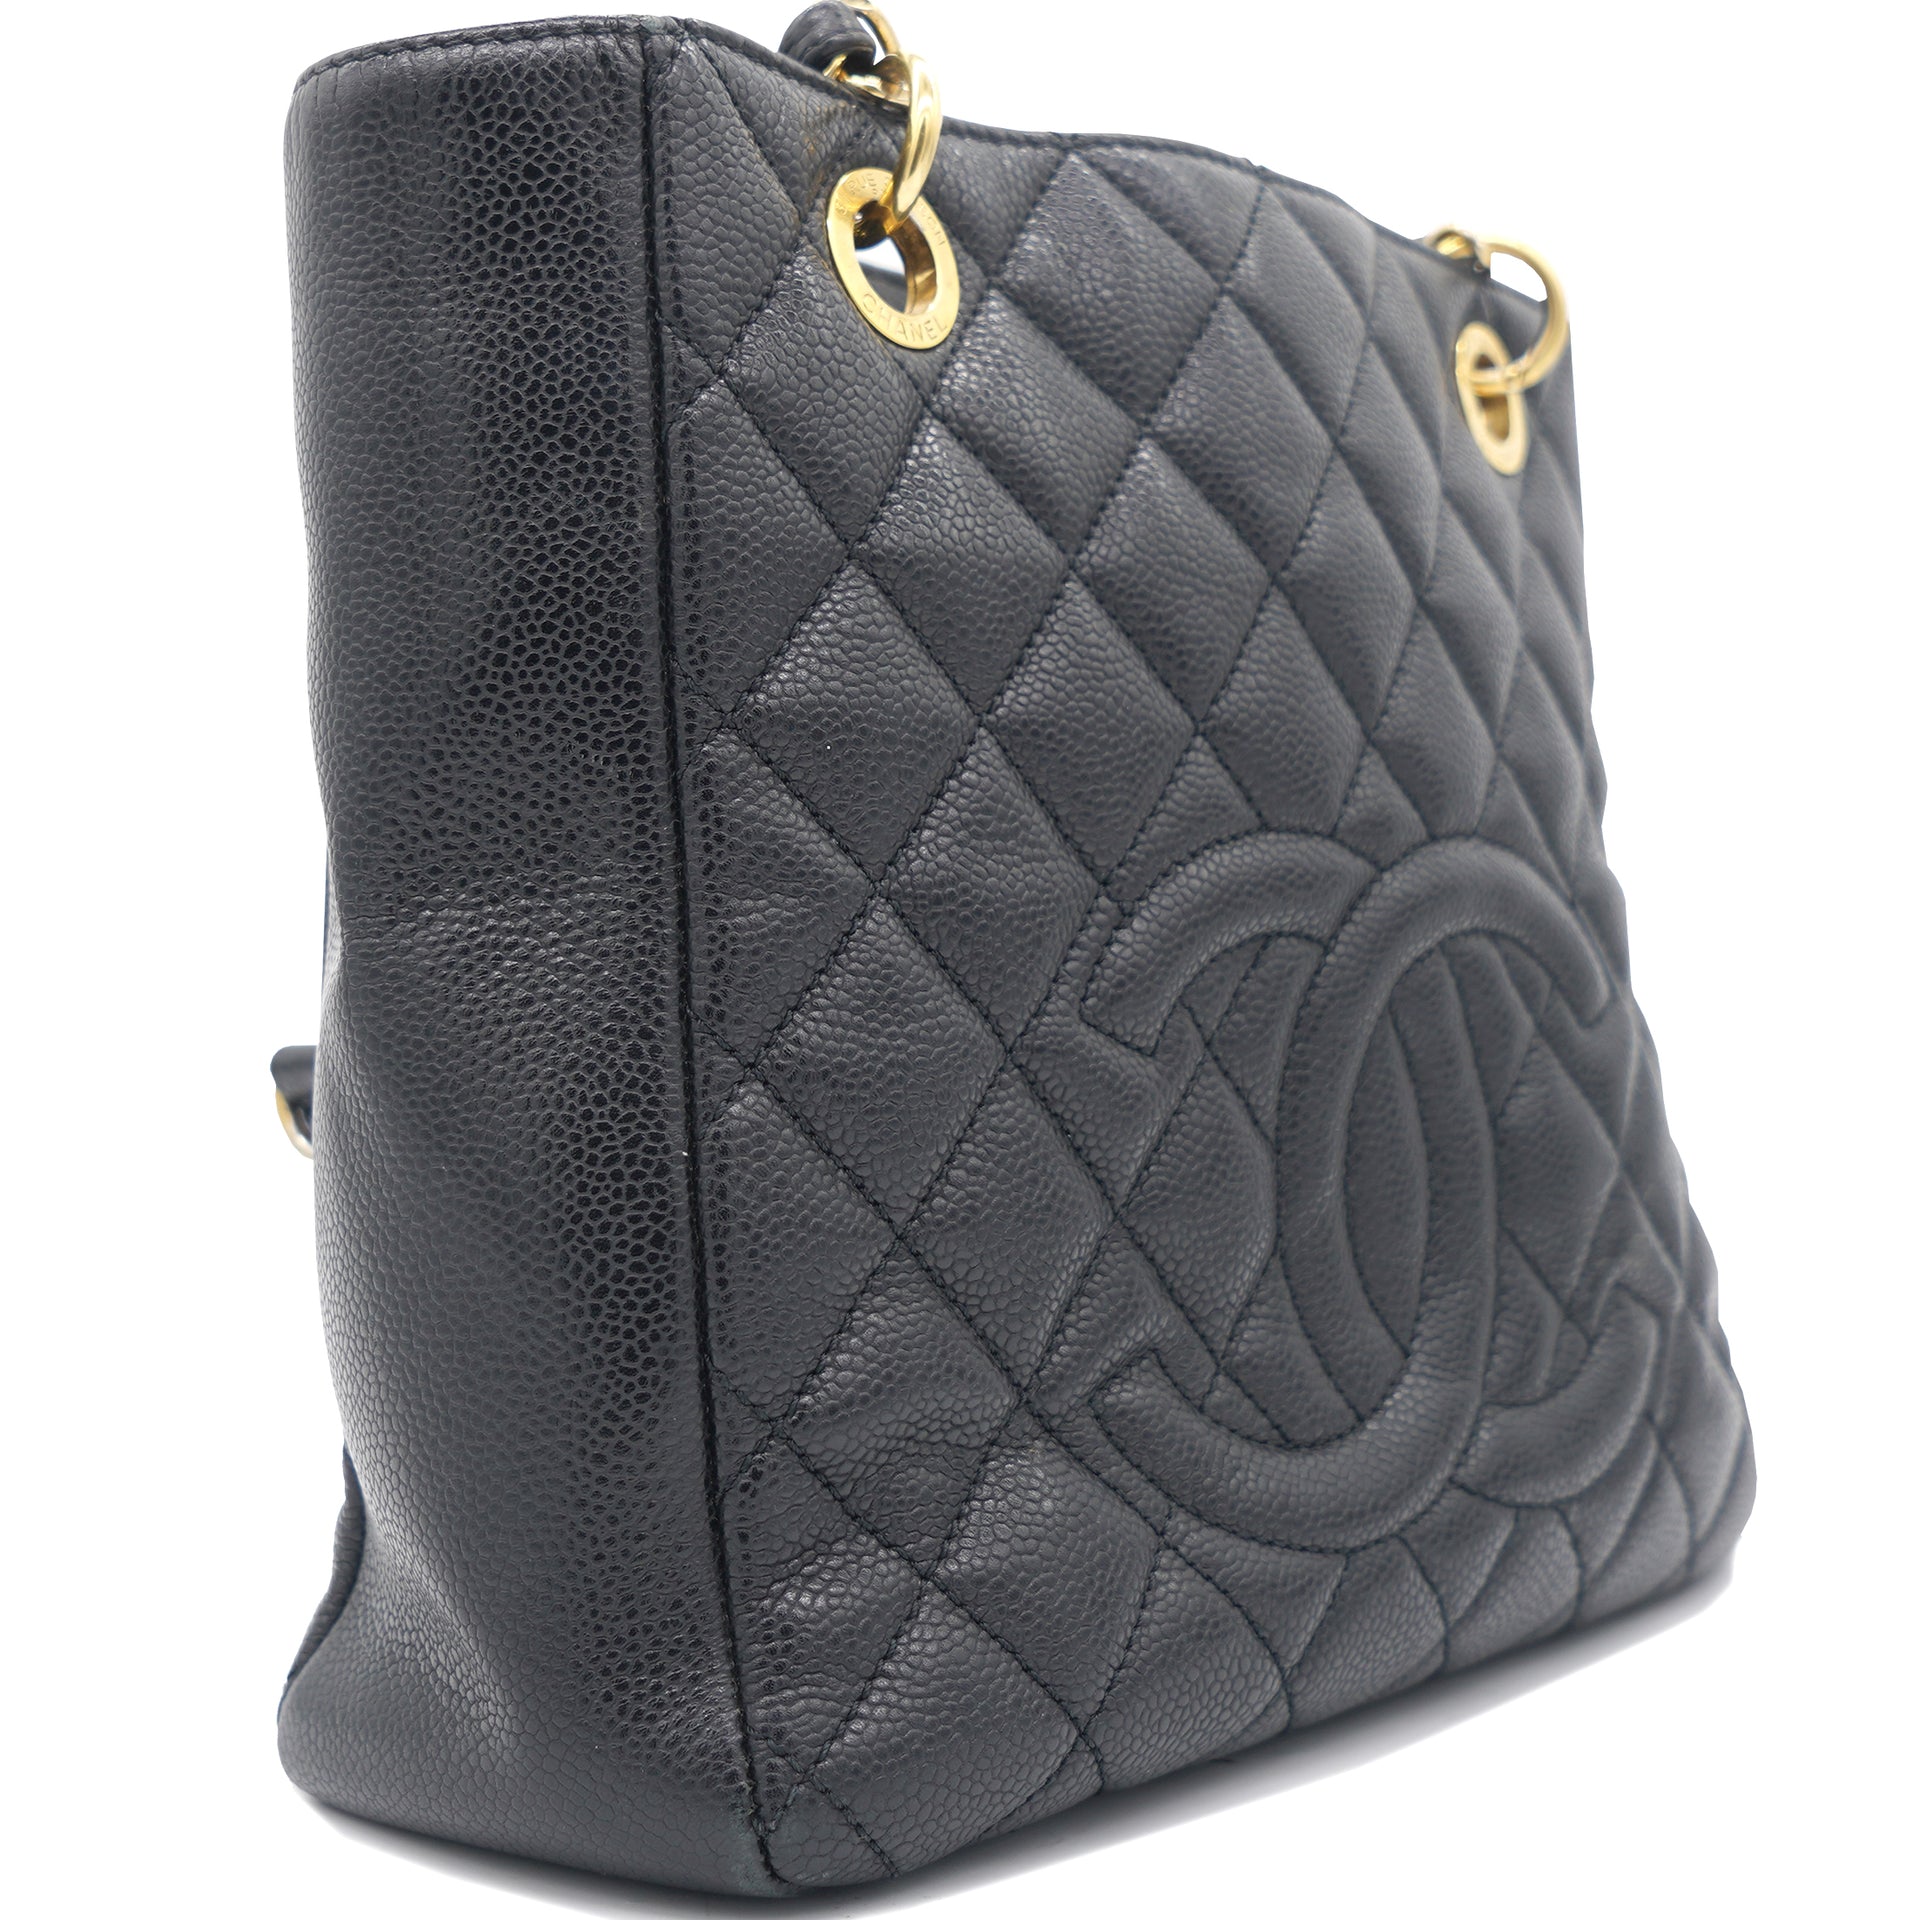 Chanel Black CC Logo Quilted Shopping Tote - Authenticity